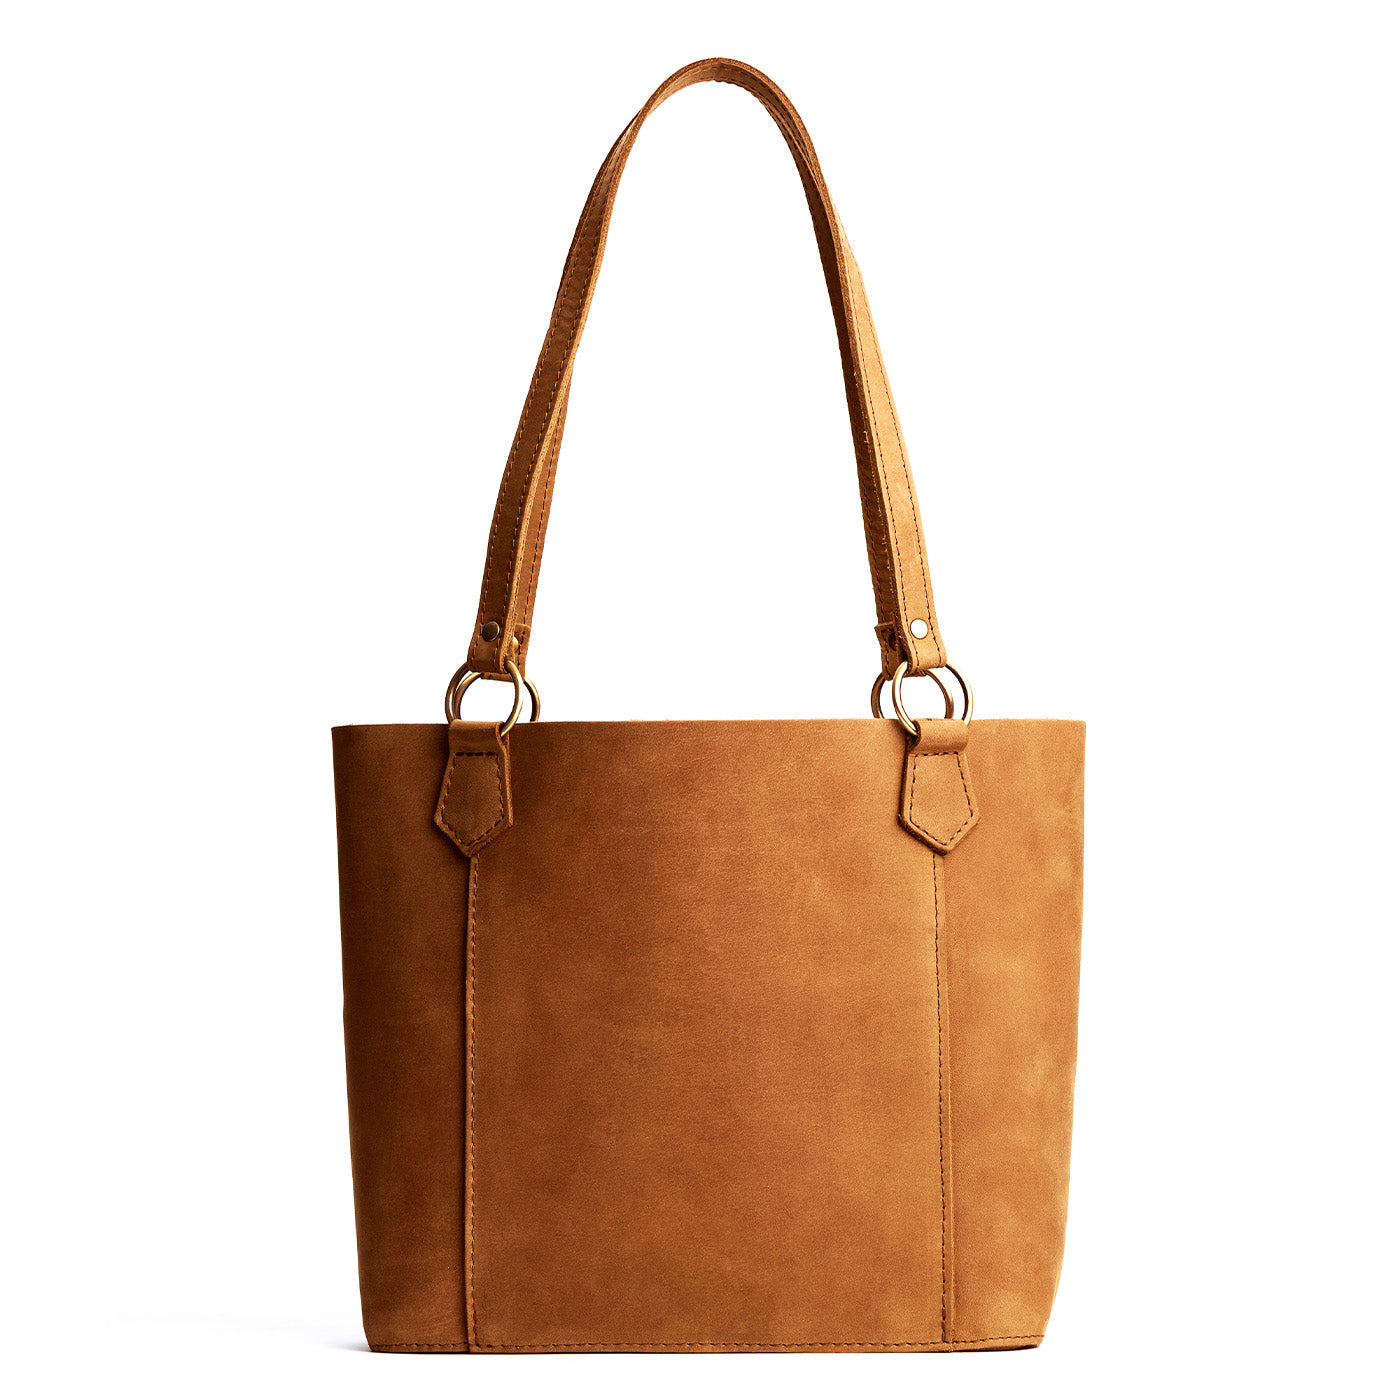 This bestselling tote bag comes in 160 colors and is on sale for under $20!  - Good Morning America